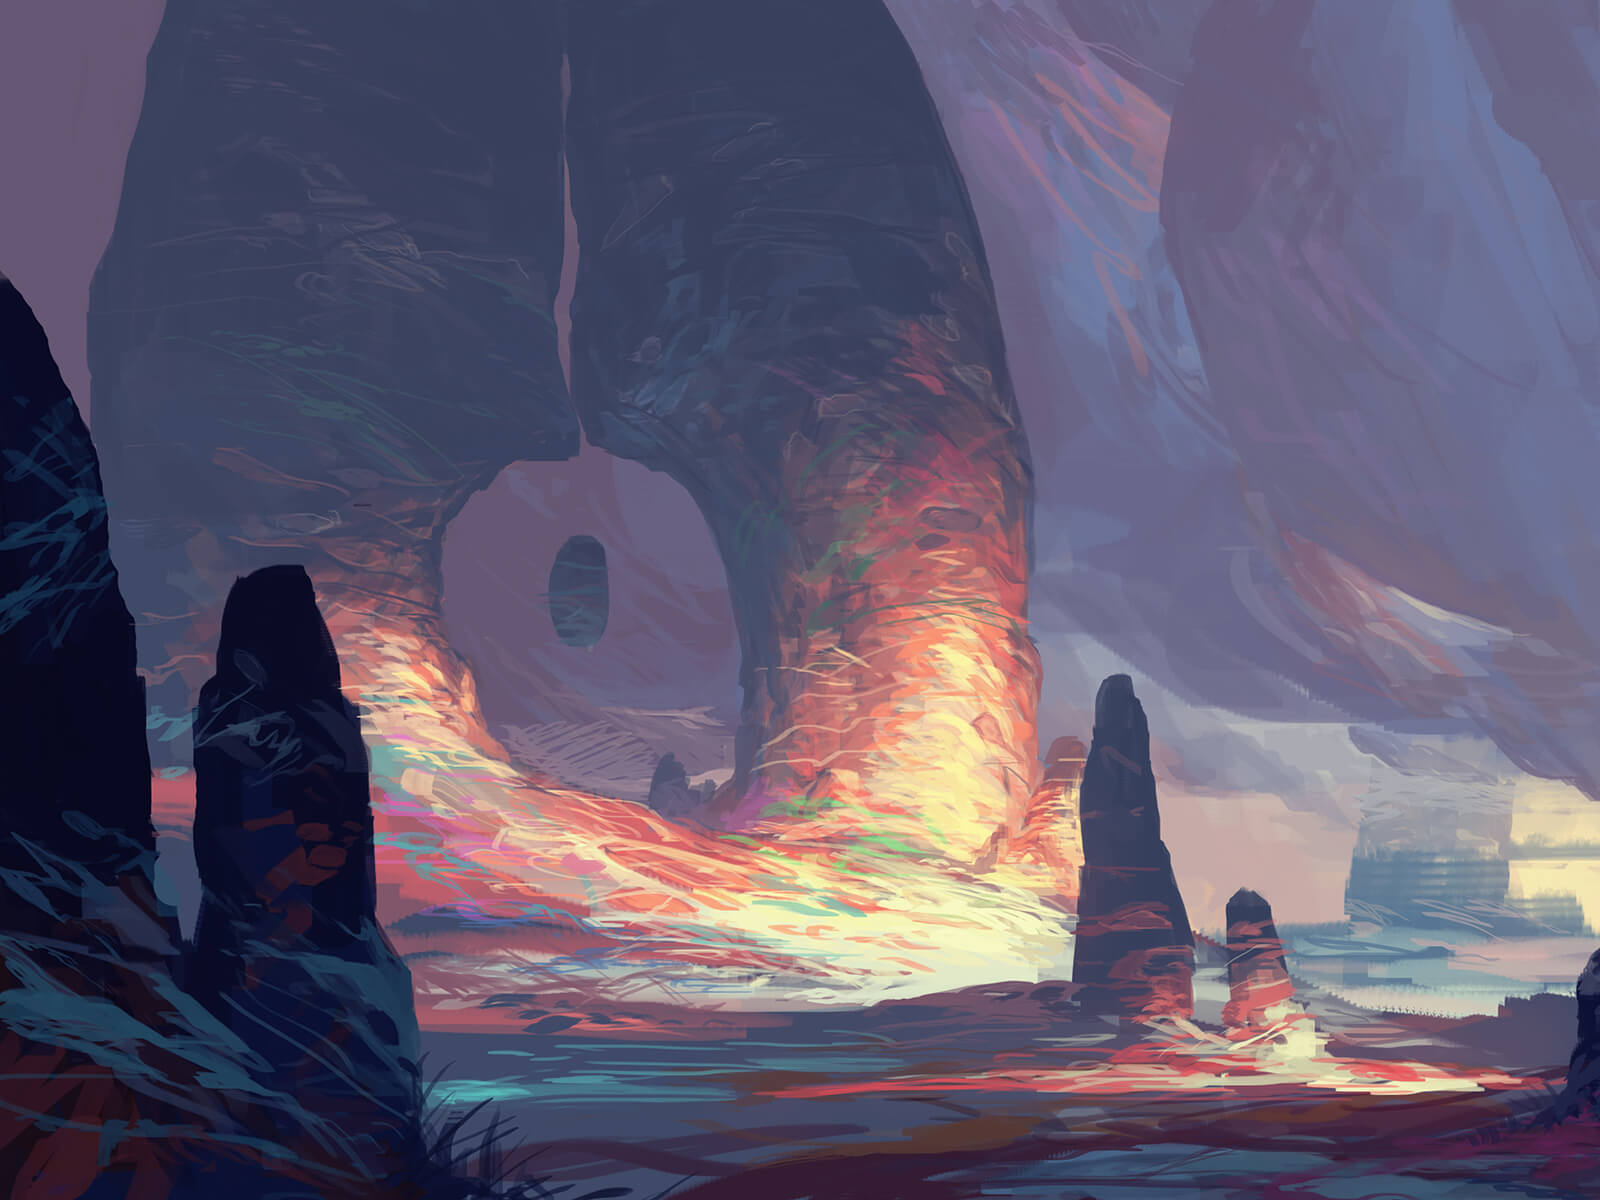 A rocky, alien environment with colorful outcroppings. An ovoid boulder floats inexplicably in between two stone spires.